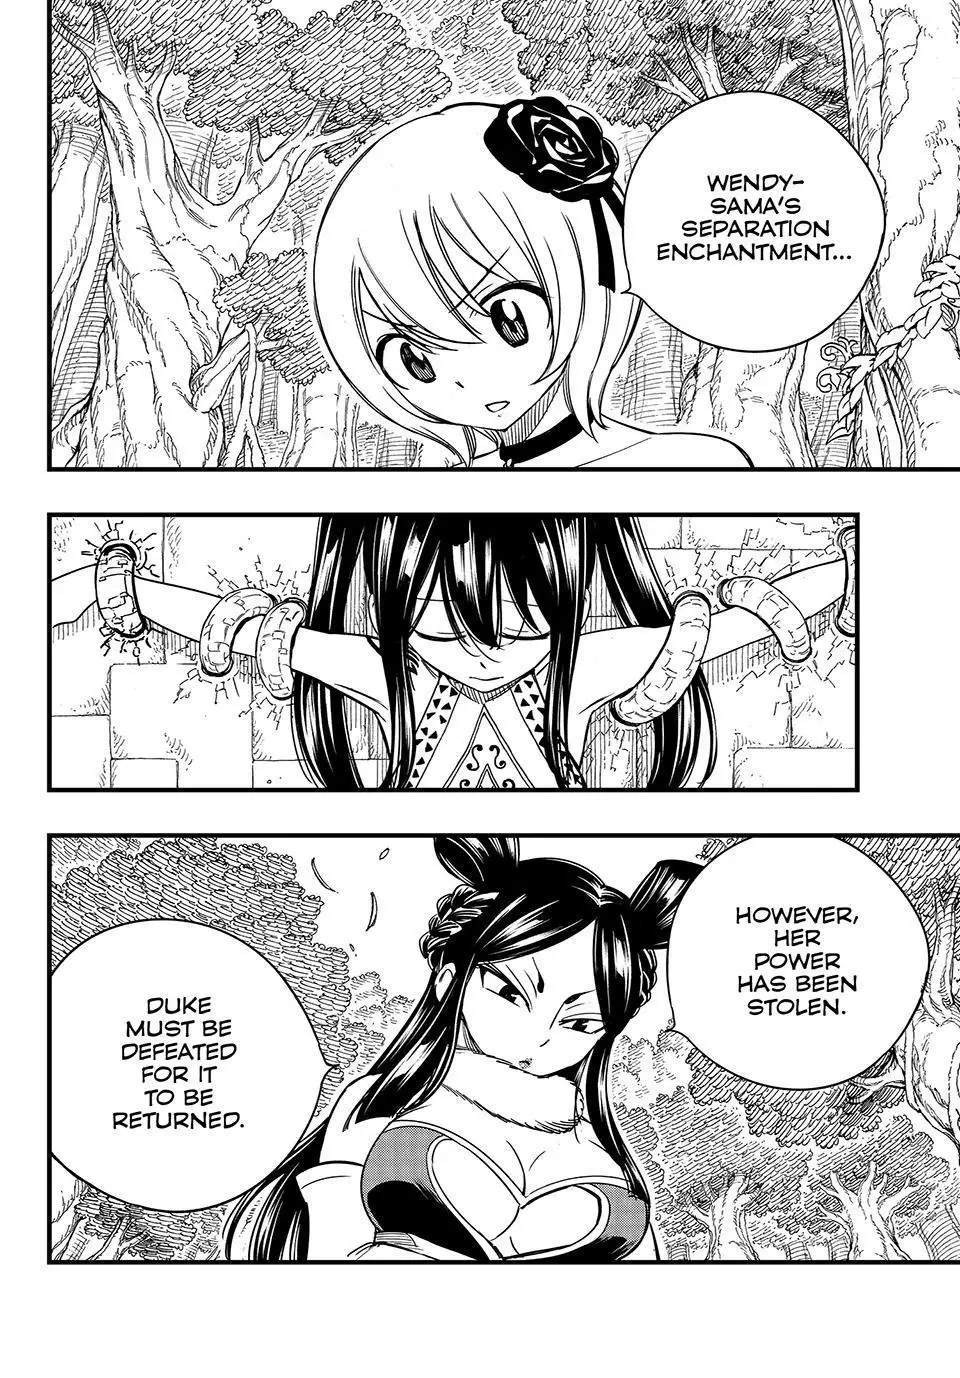 Fairy Tail: 100 Years Quest 148